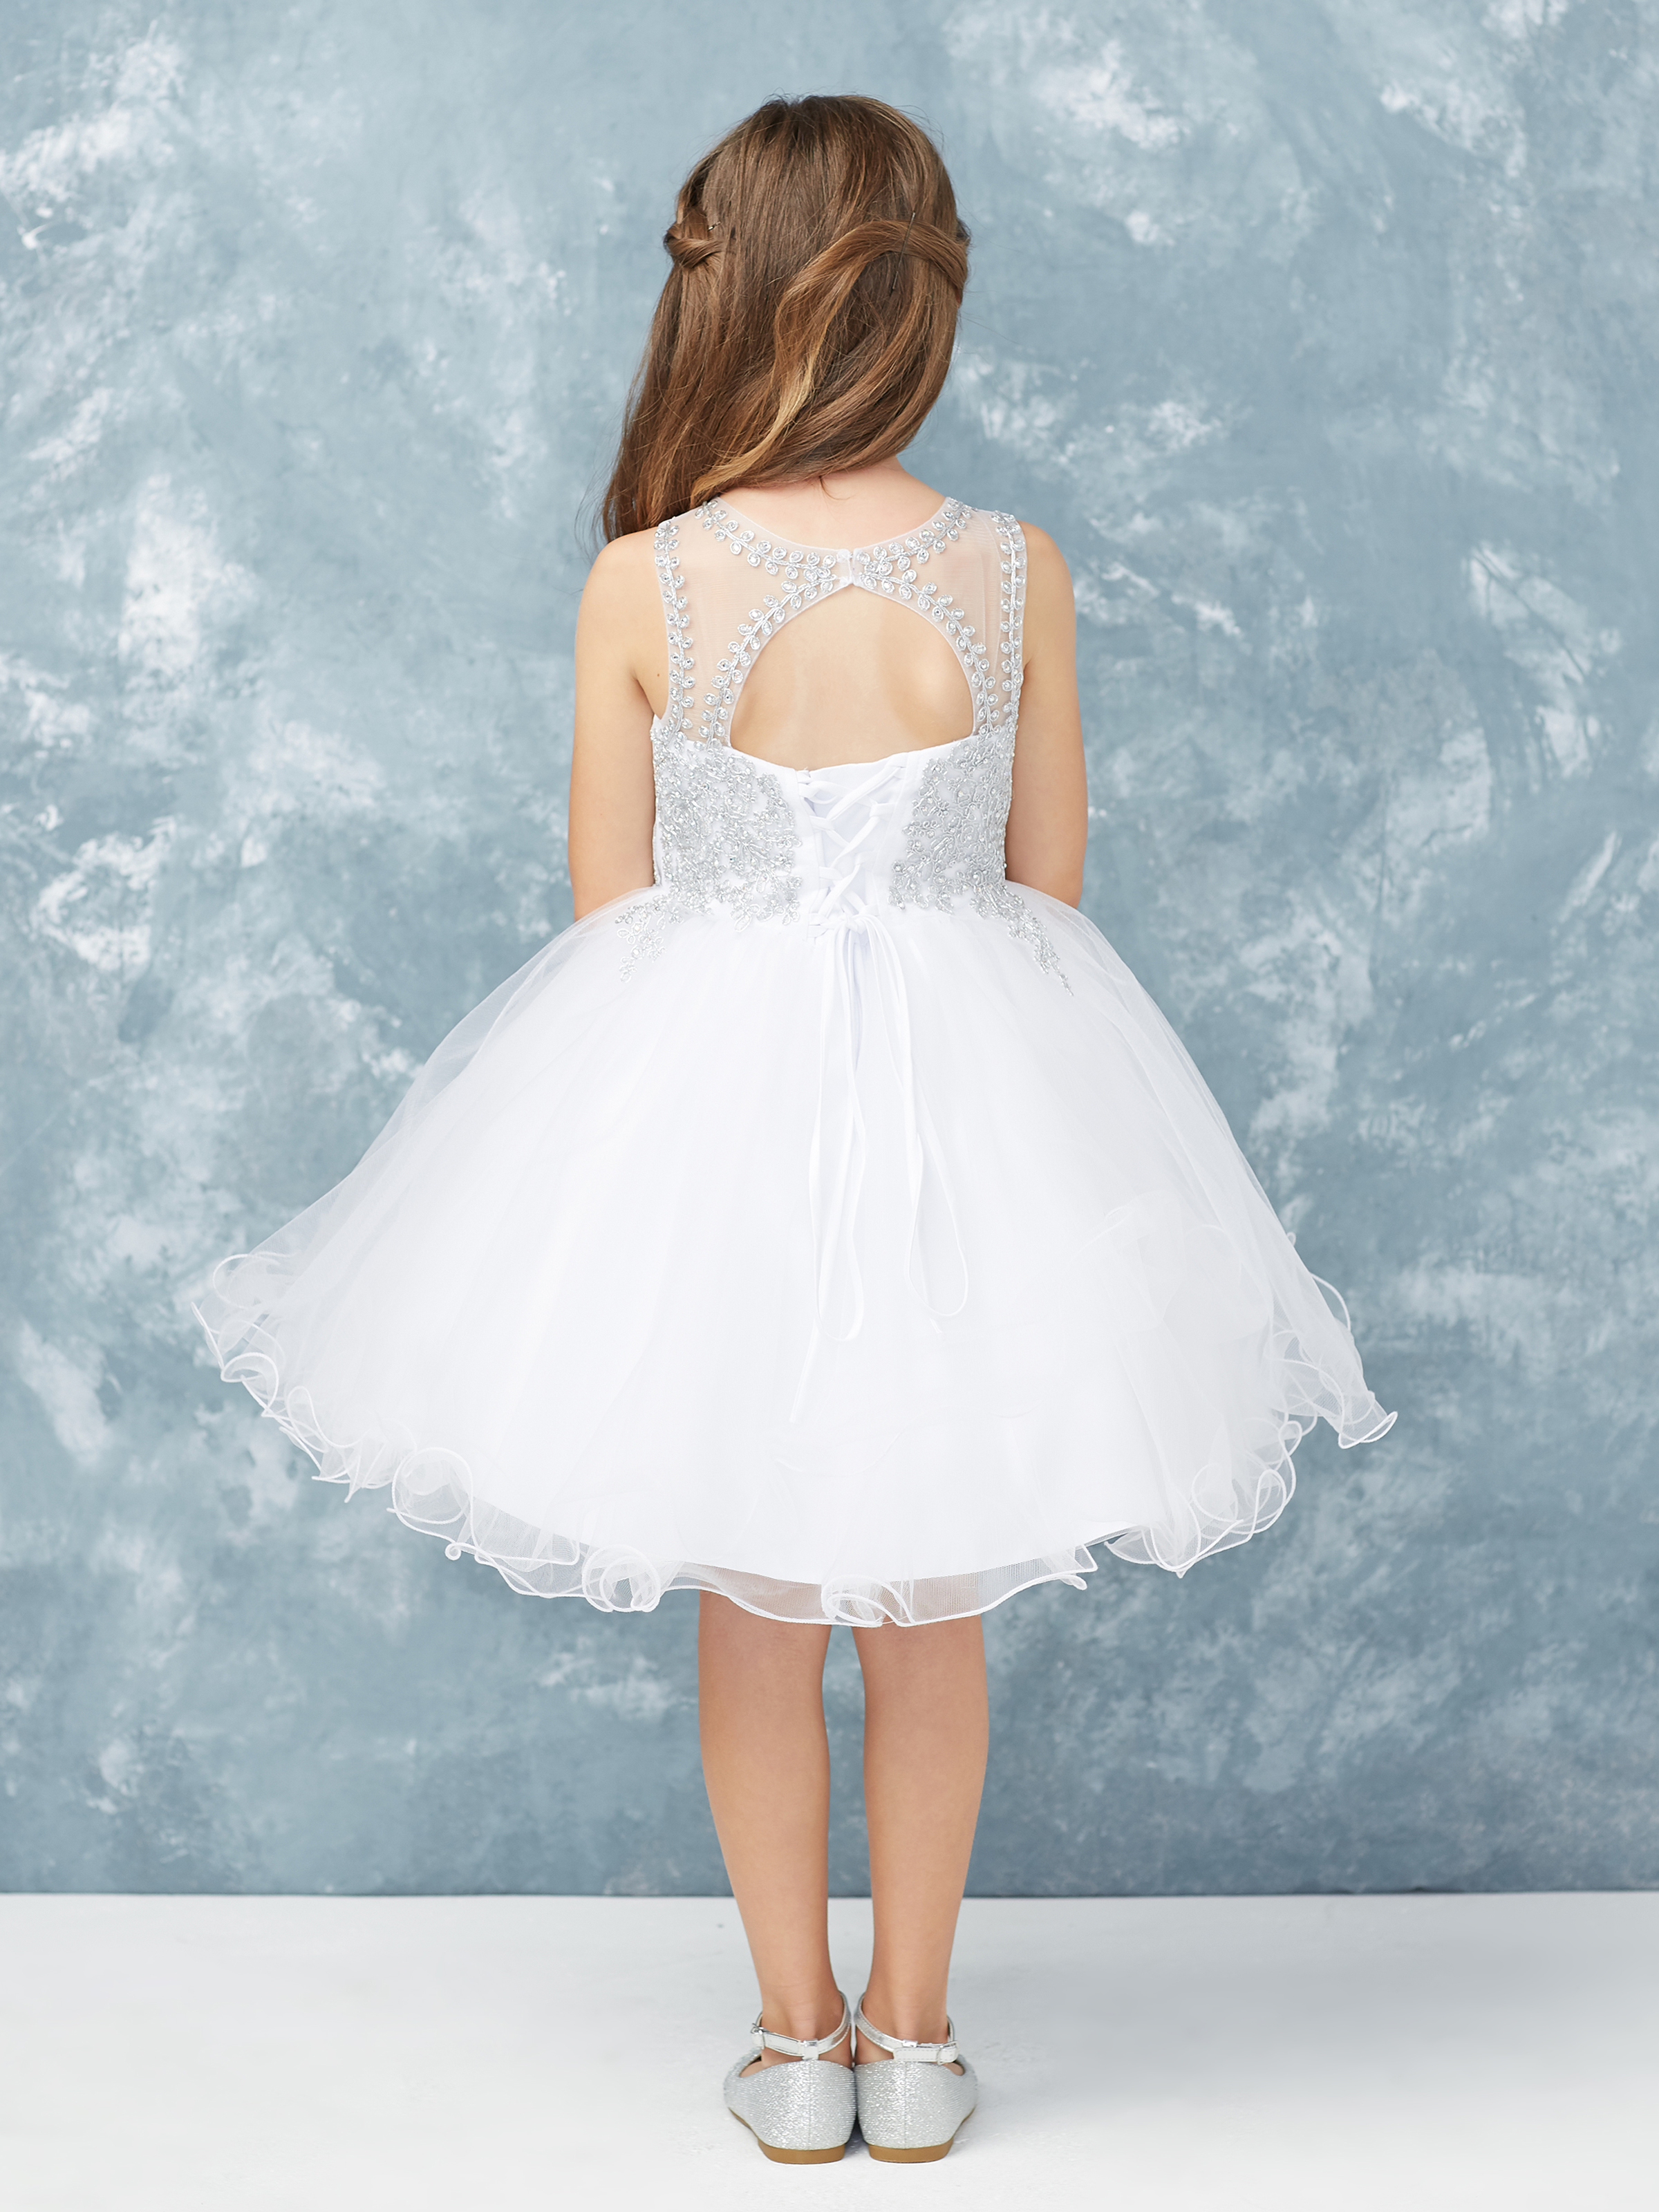 dresses for first communion near me